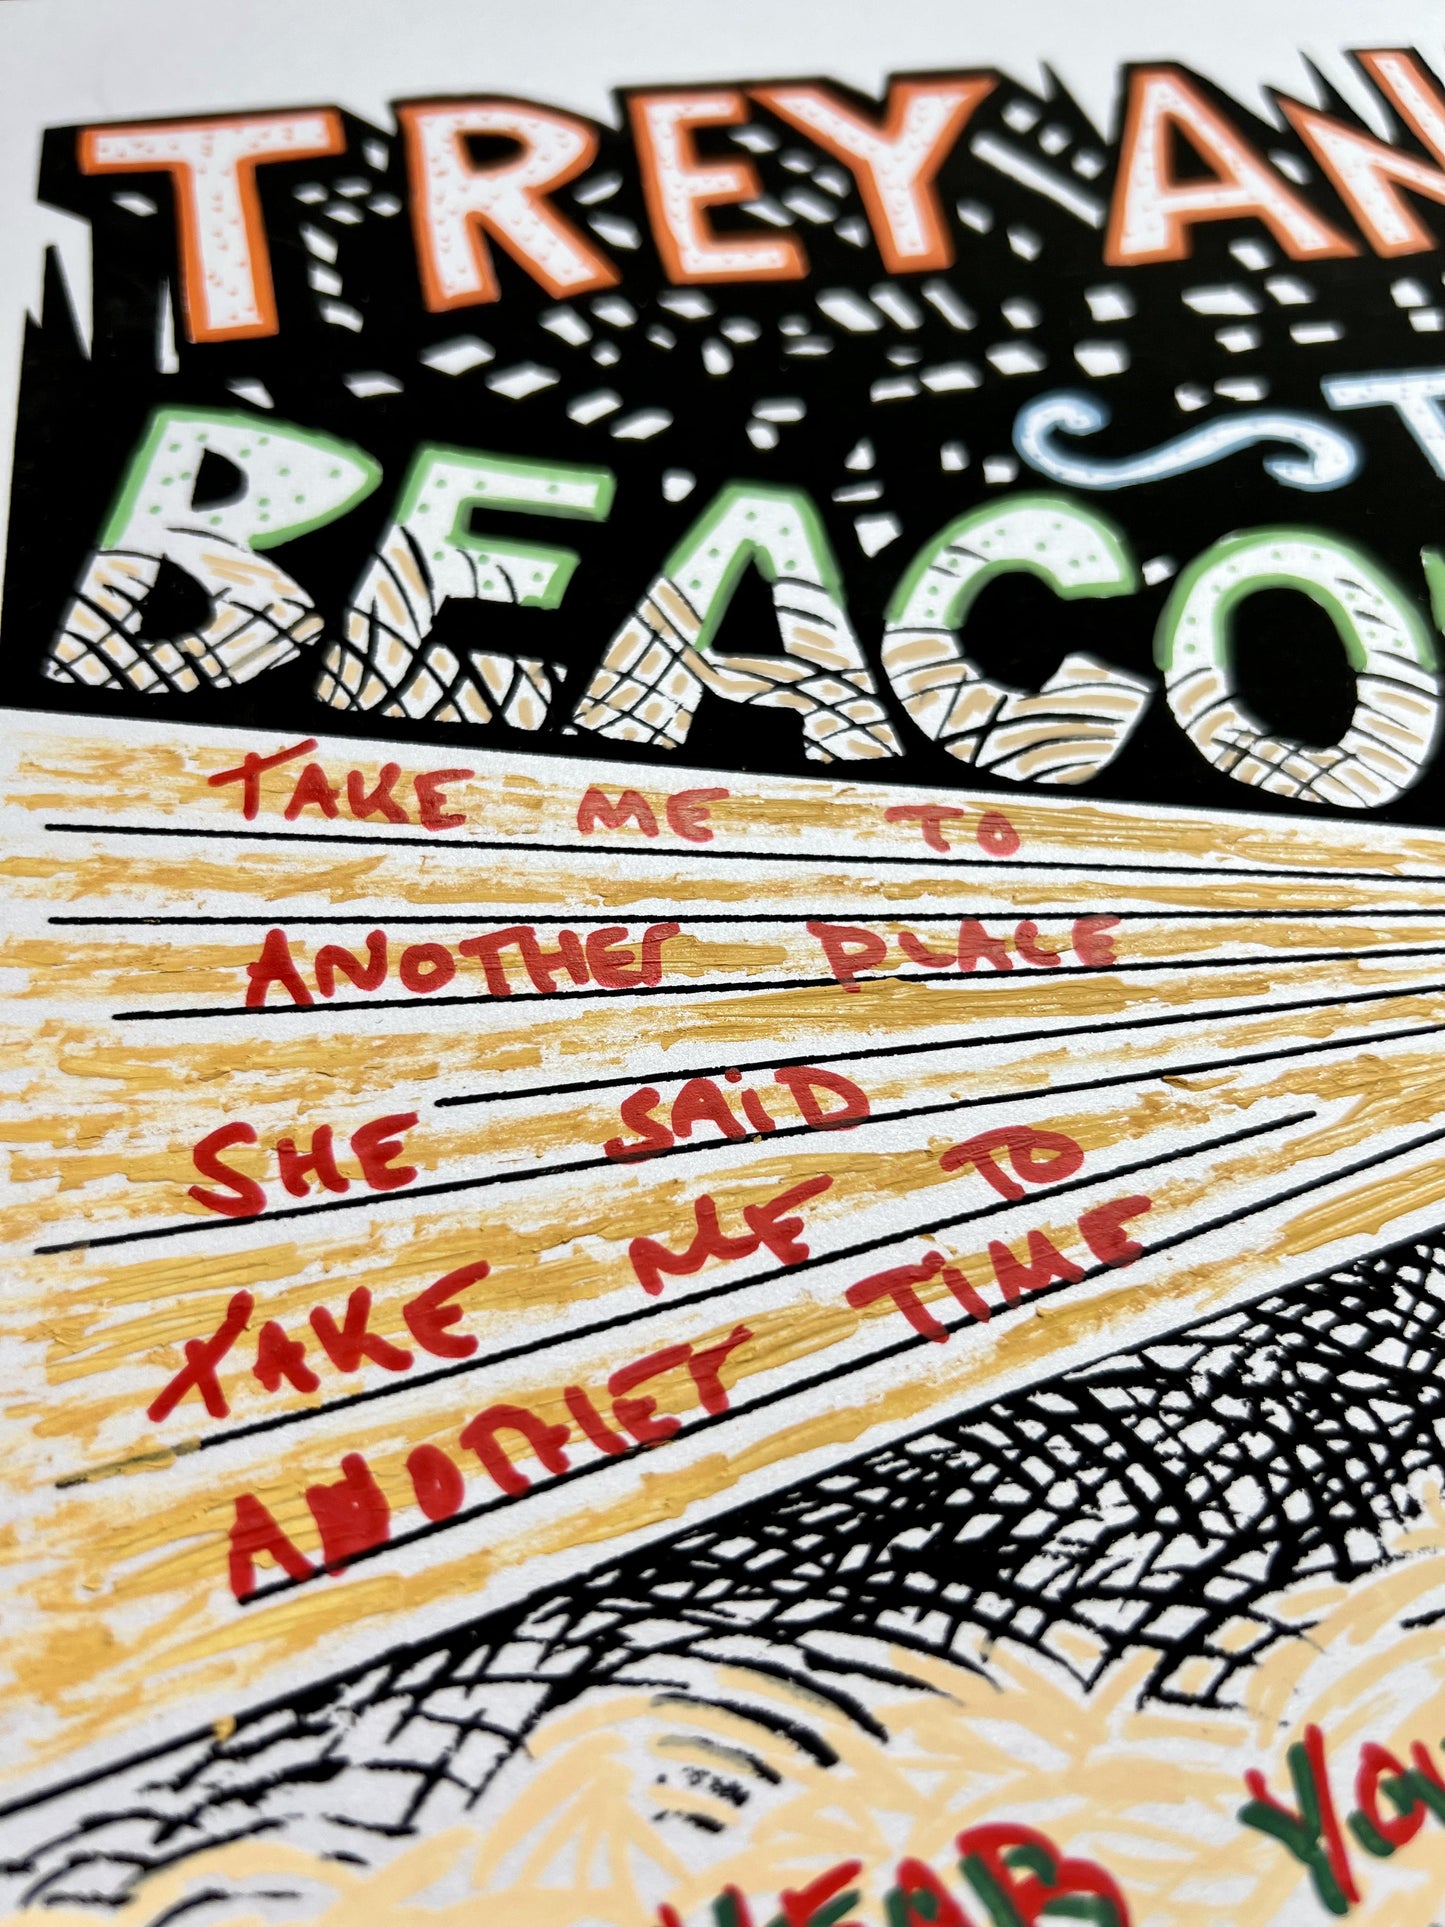 The Beacon Jams - 46. If I Could